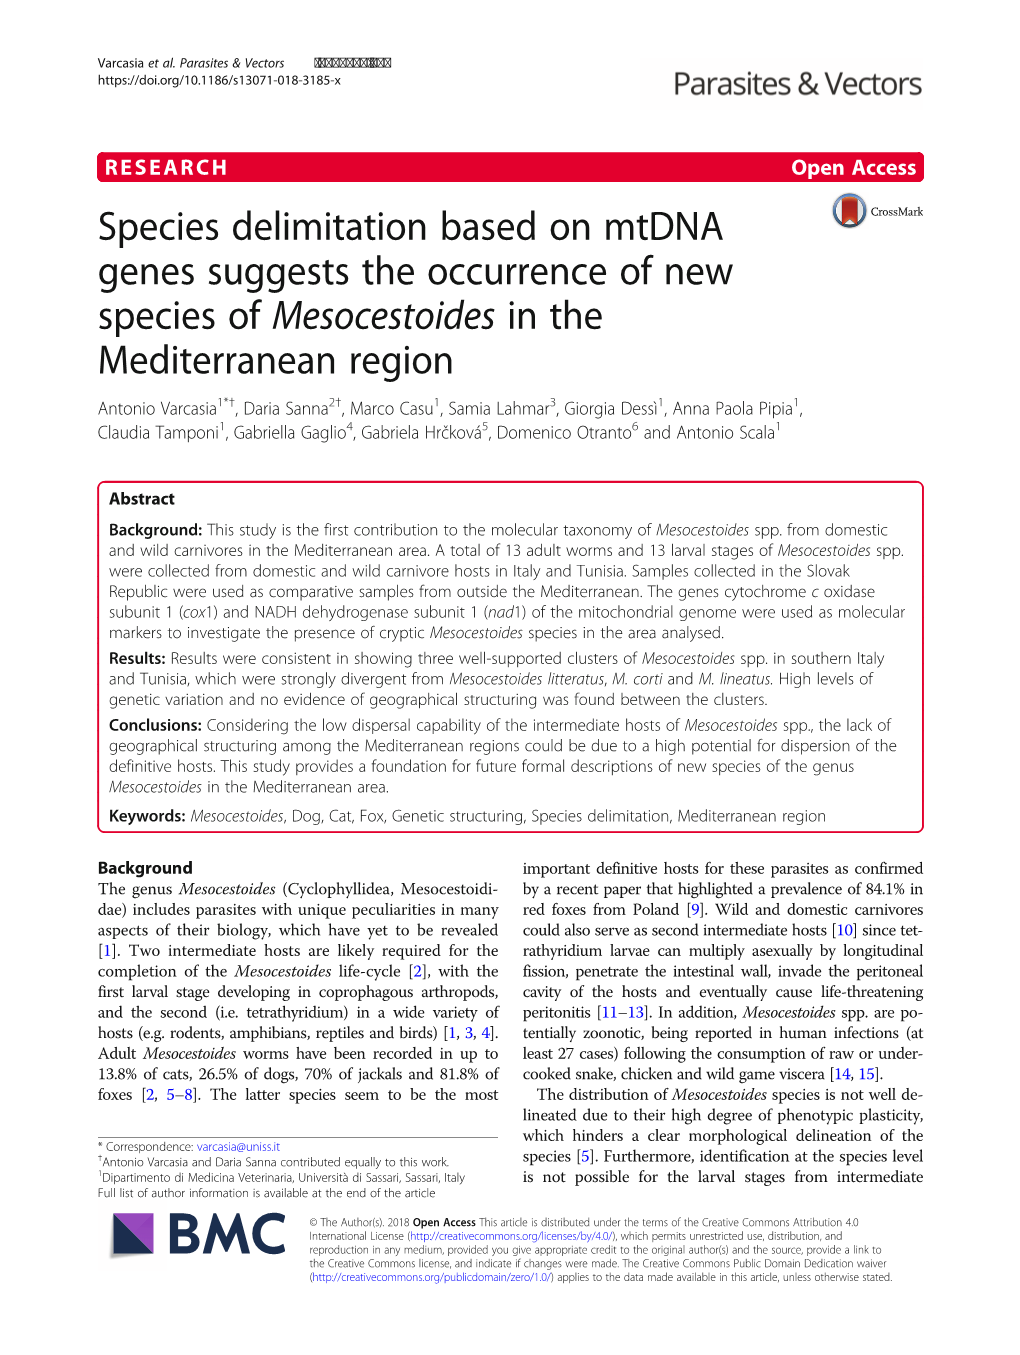 Species Delimitation Based on Mtdna Genes Suggests the Occurrence Of